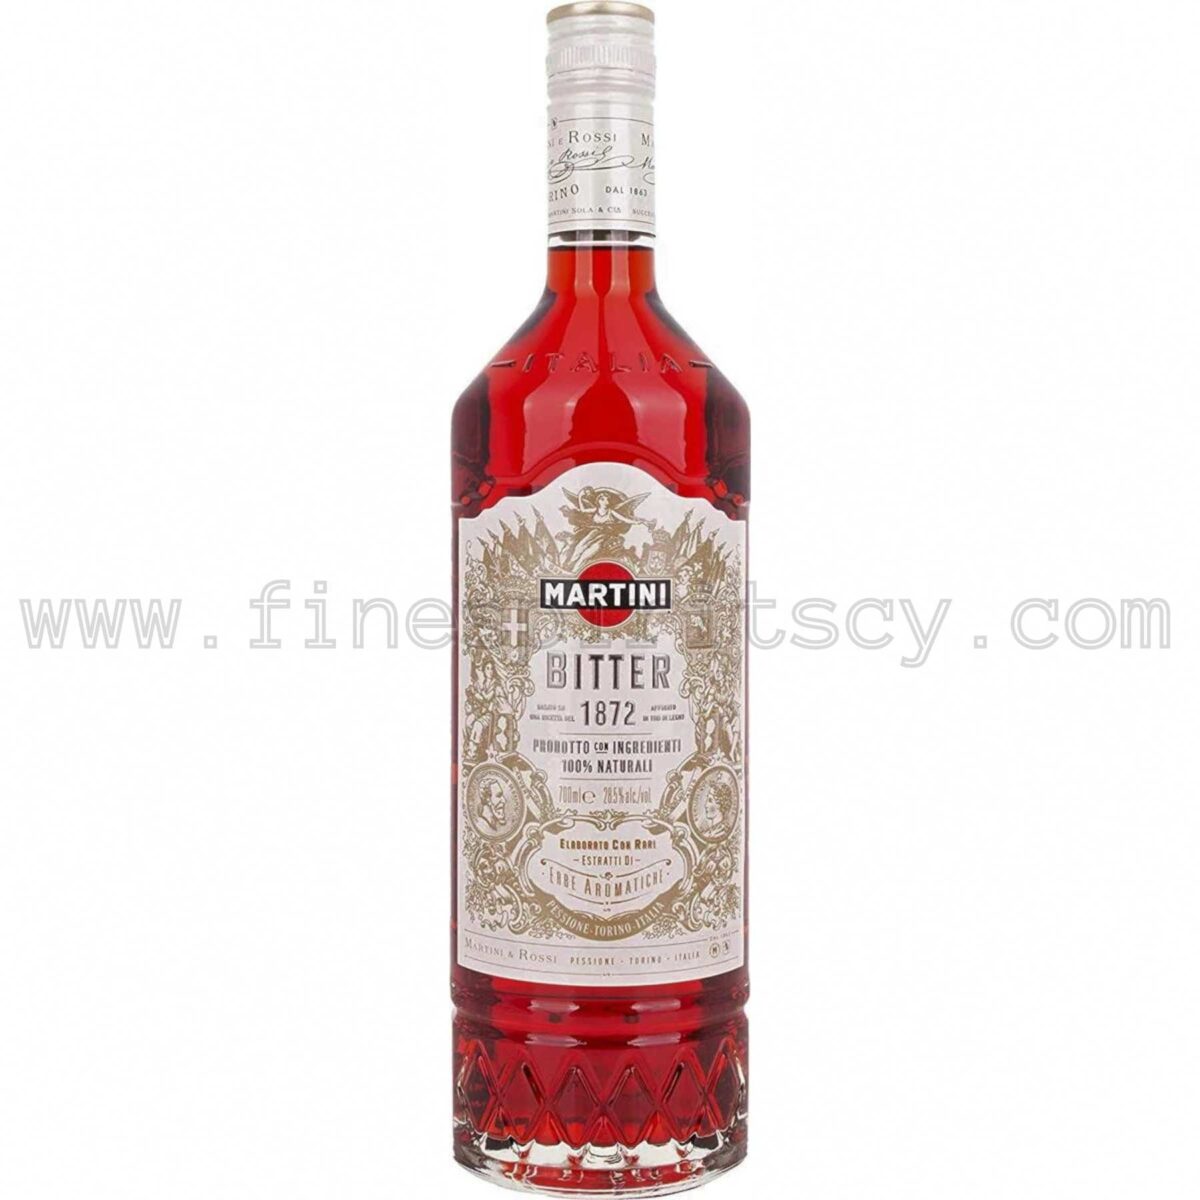 Martini Bitter Riserva CY Speciale Vermouth Cyprus Price Order Buy Shop 75cl